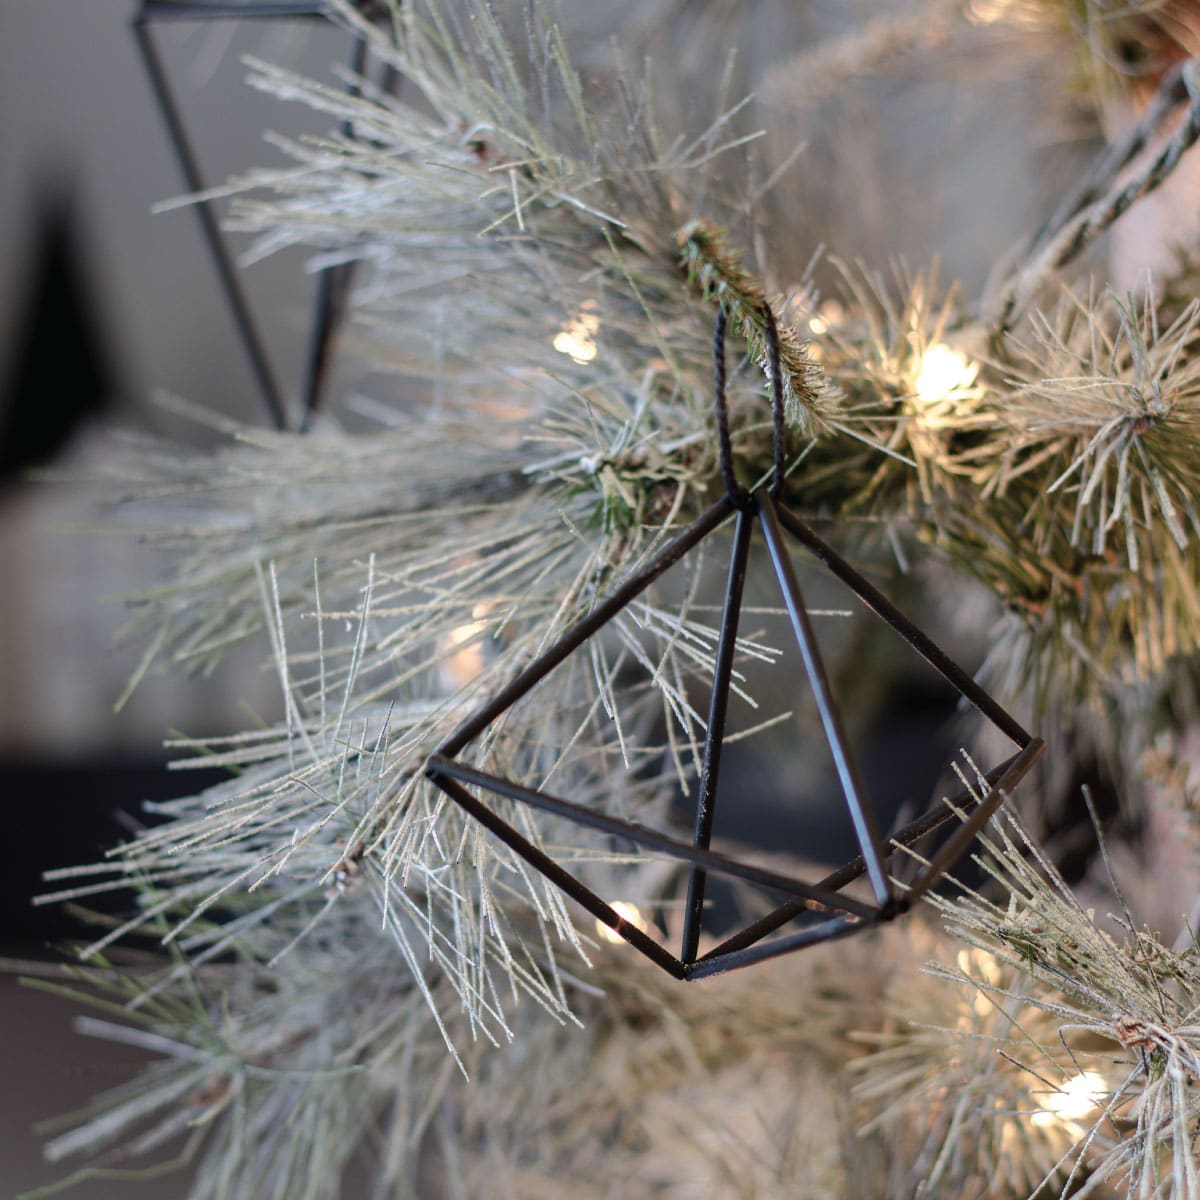 Learn how to make himmeli ornaments for your Christmas decor. These handmade Finnish-inspired Christmas tree ornaments are so easy and cheap to make, plus the geometric look adds a modern edge to your tree. #christmasornament #ornament #himmeli